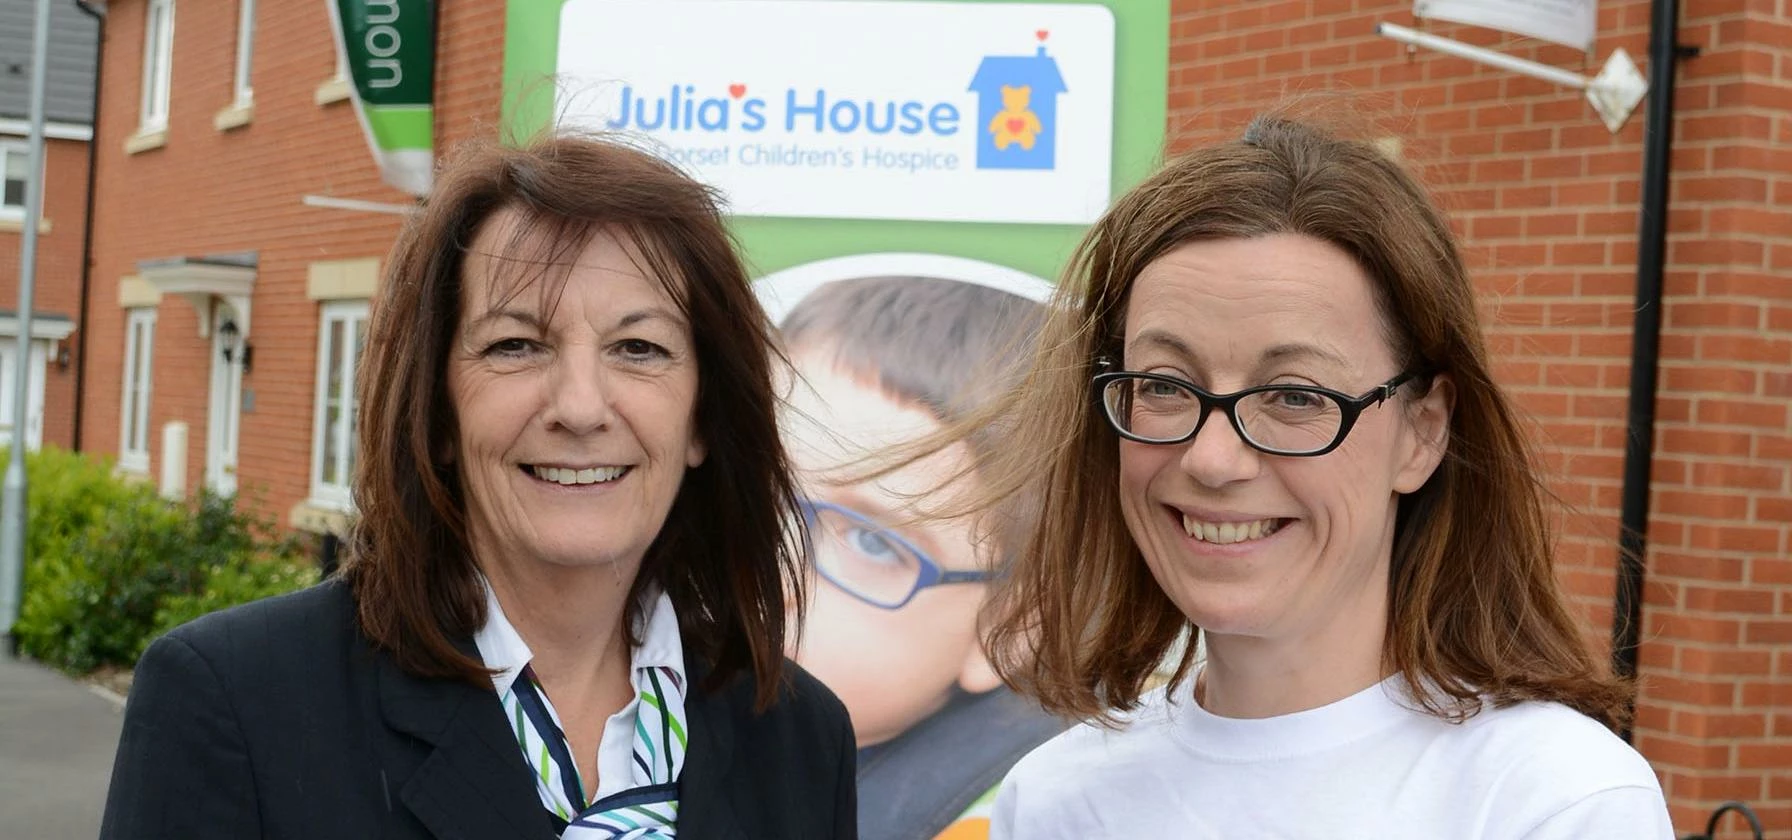 Julia's House receives £1,000 from Persimmon Homes Wessex